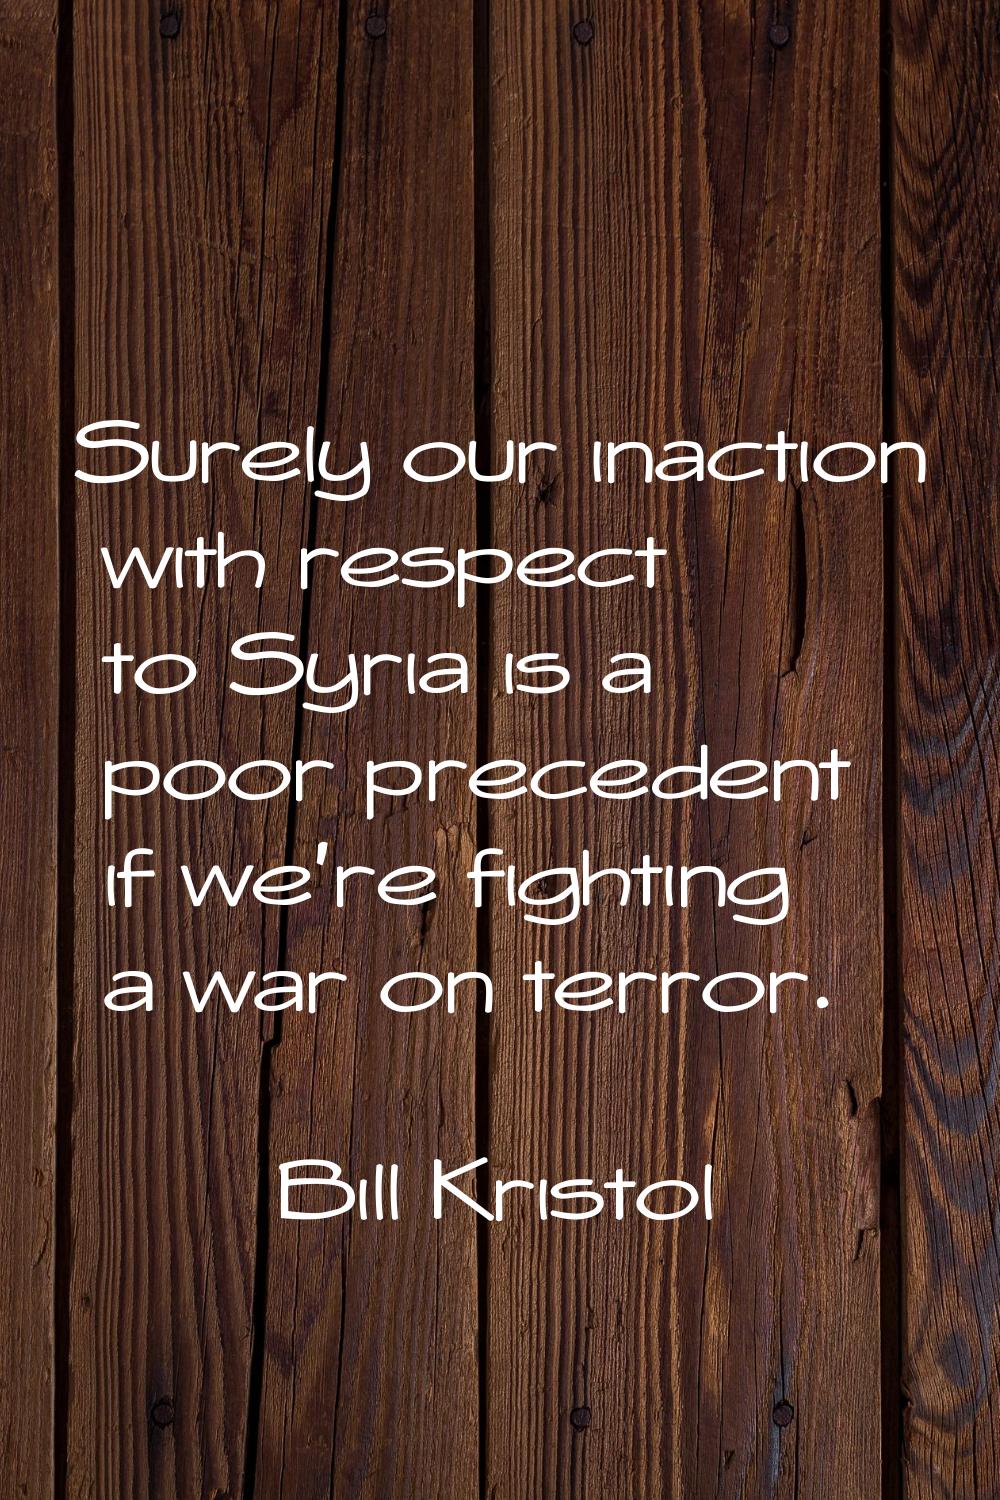 Surely our inaction with respect to Syria is a poor precedent if we're fighting a war on terror.